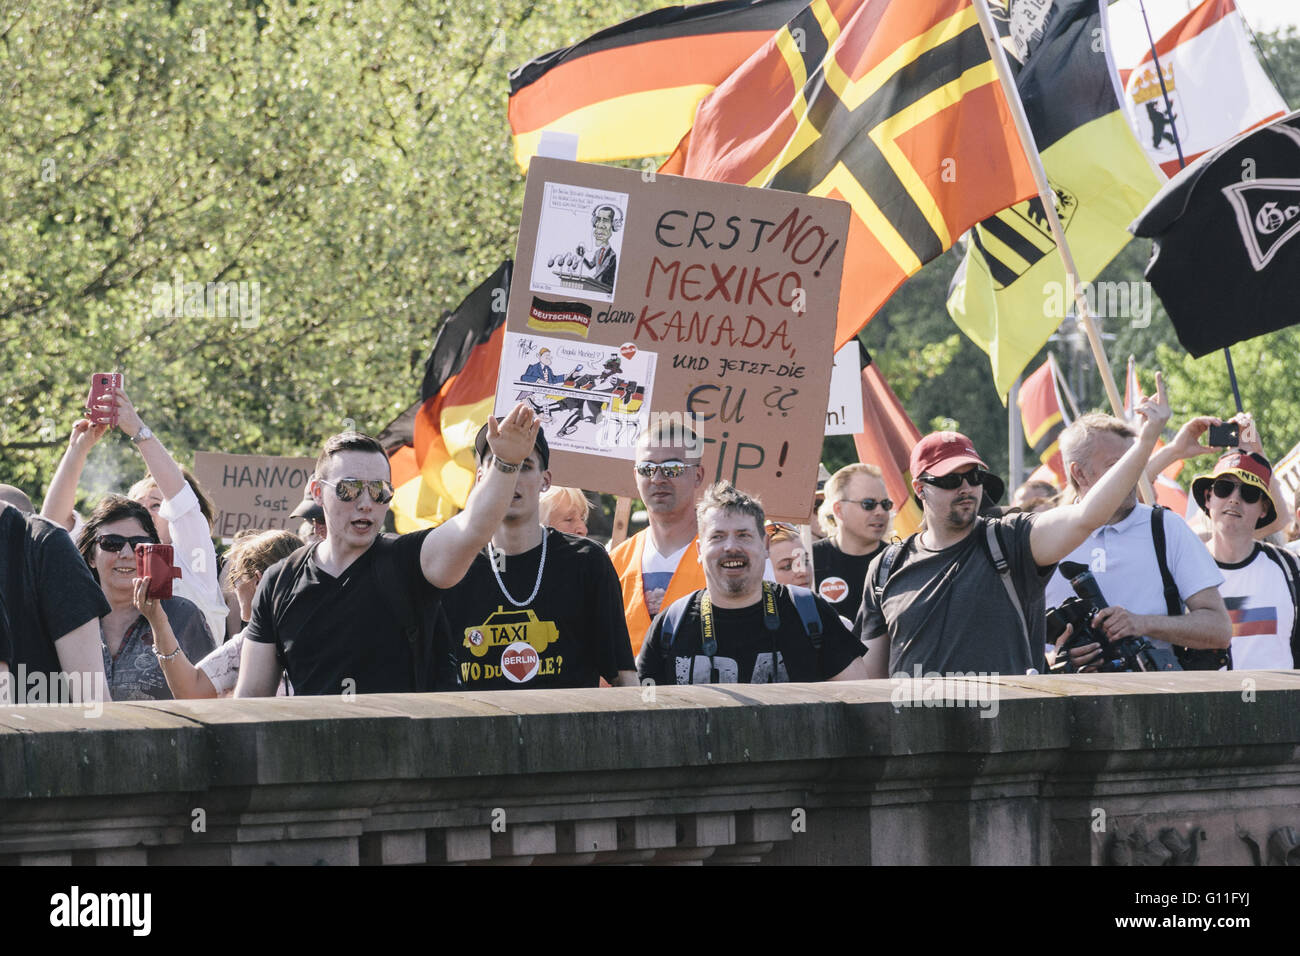 Berlin, Berlin, Germany. 7th May, 2016. Protesters react to counter-activists near Berlin central station during the rally held under the motto 'Merkel muss weg![Merkel must go]' organised by far-right group 'We for Berlin & We for Germany' Credit:  Jan Scheunert/ZUMA Wire/Alamy Live News Stock Photo